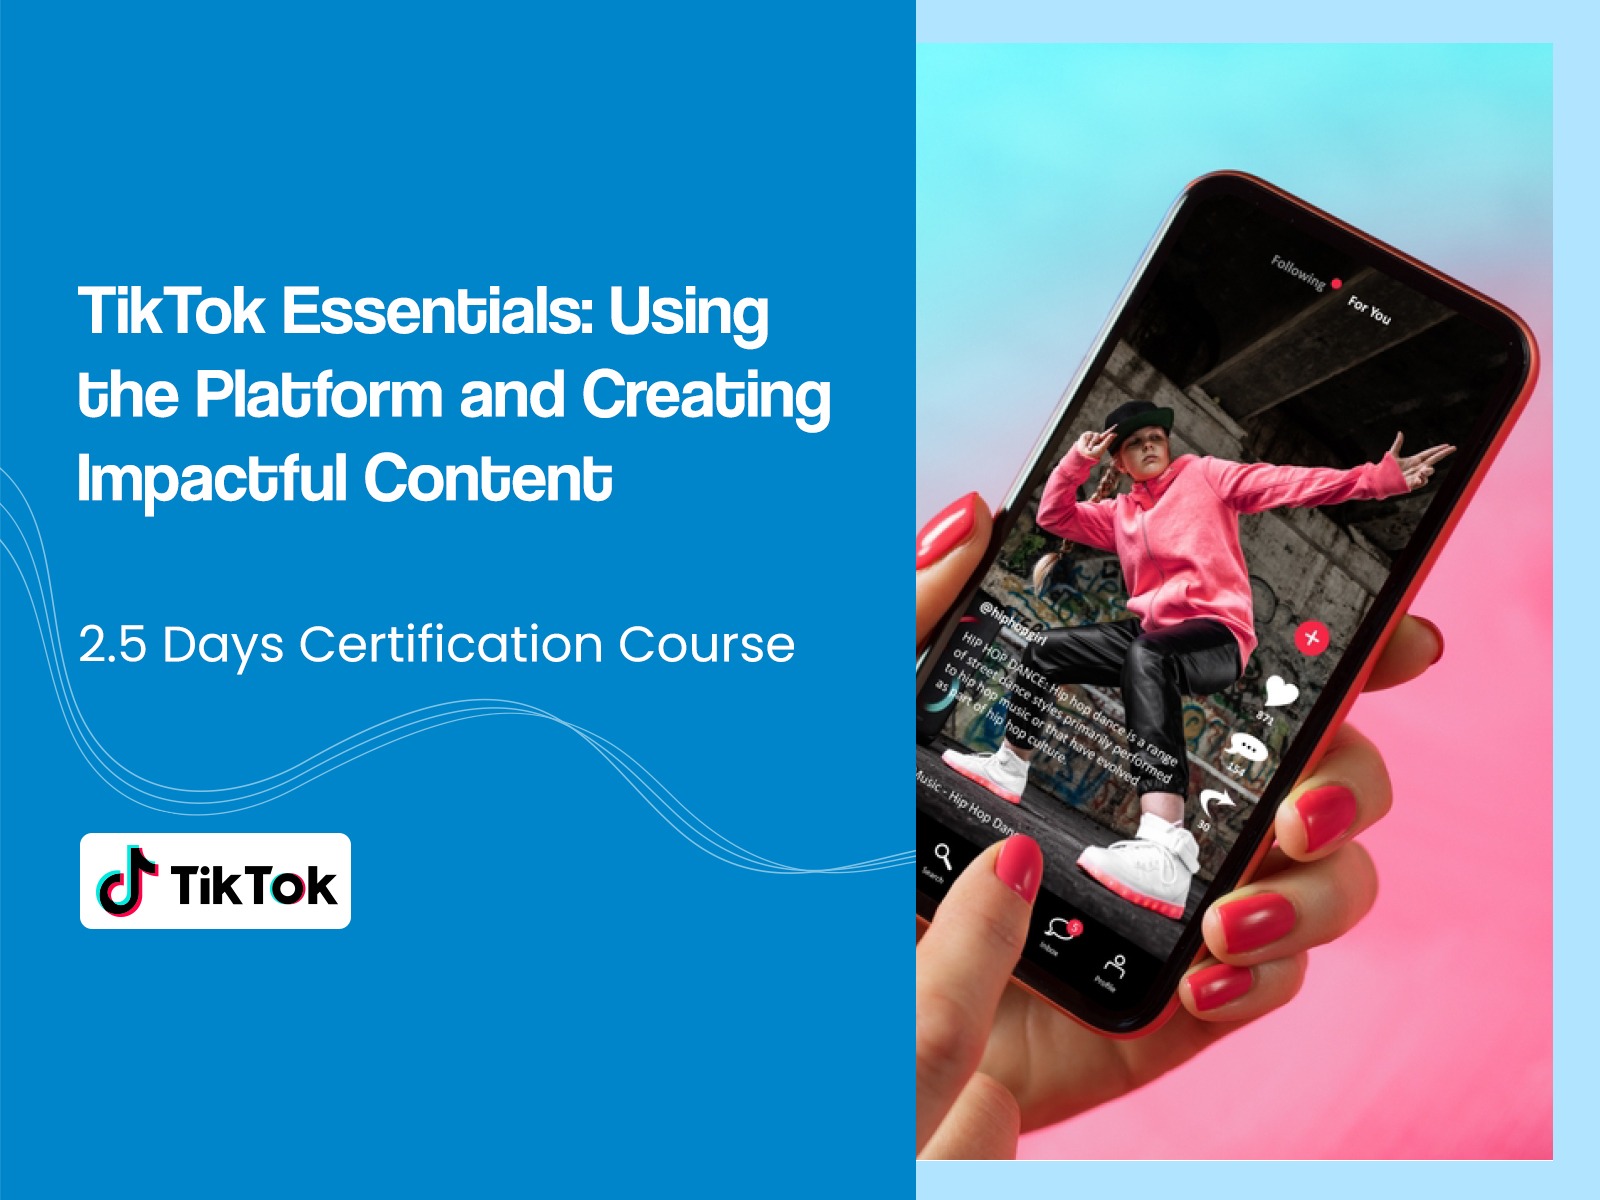 TikTok Essentials: Using the Platform and Creating Impactful Content Marketing course in Singapore